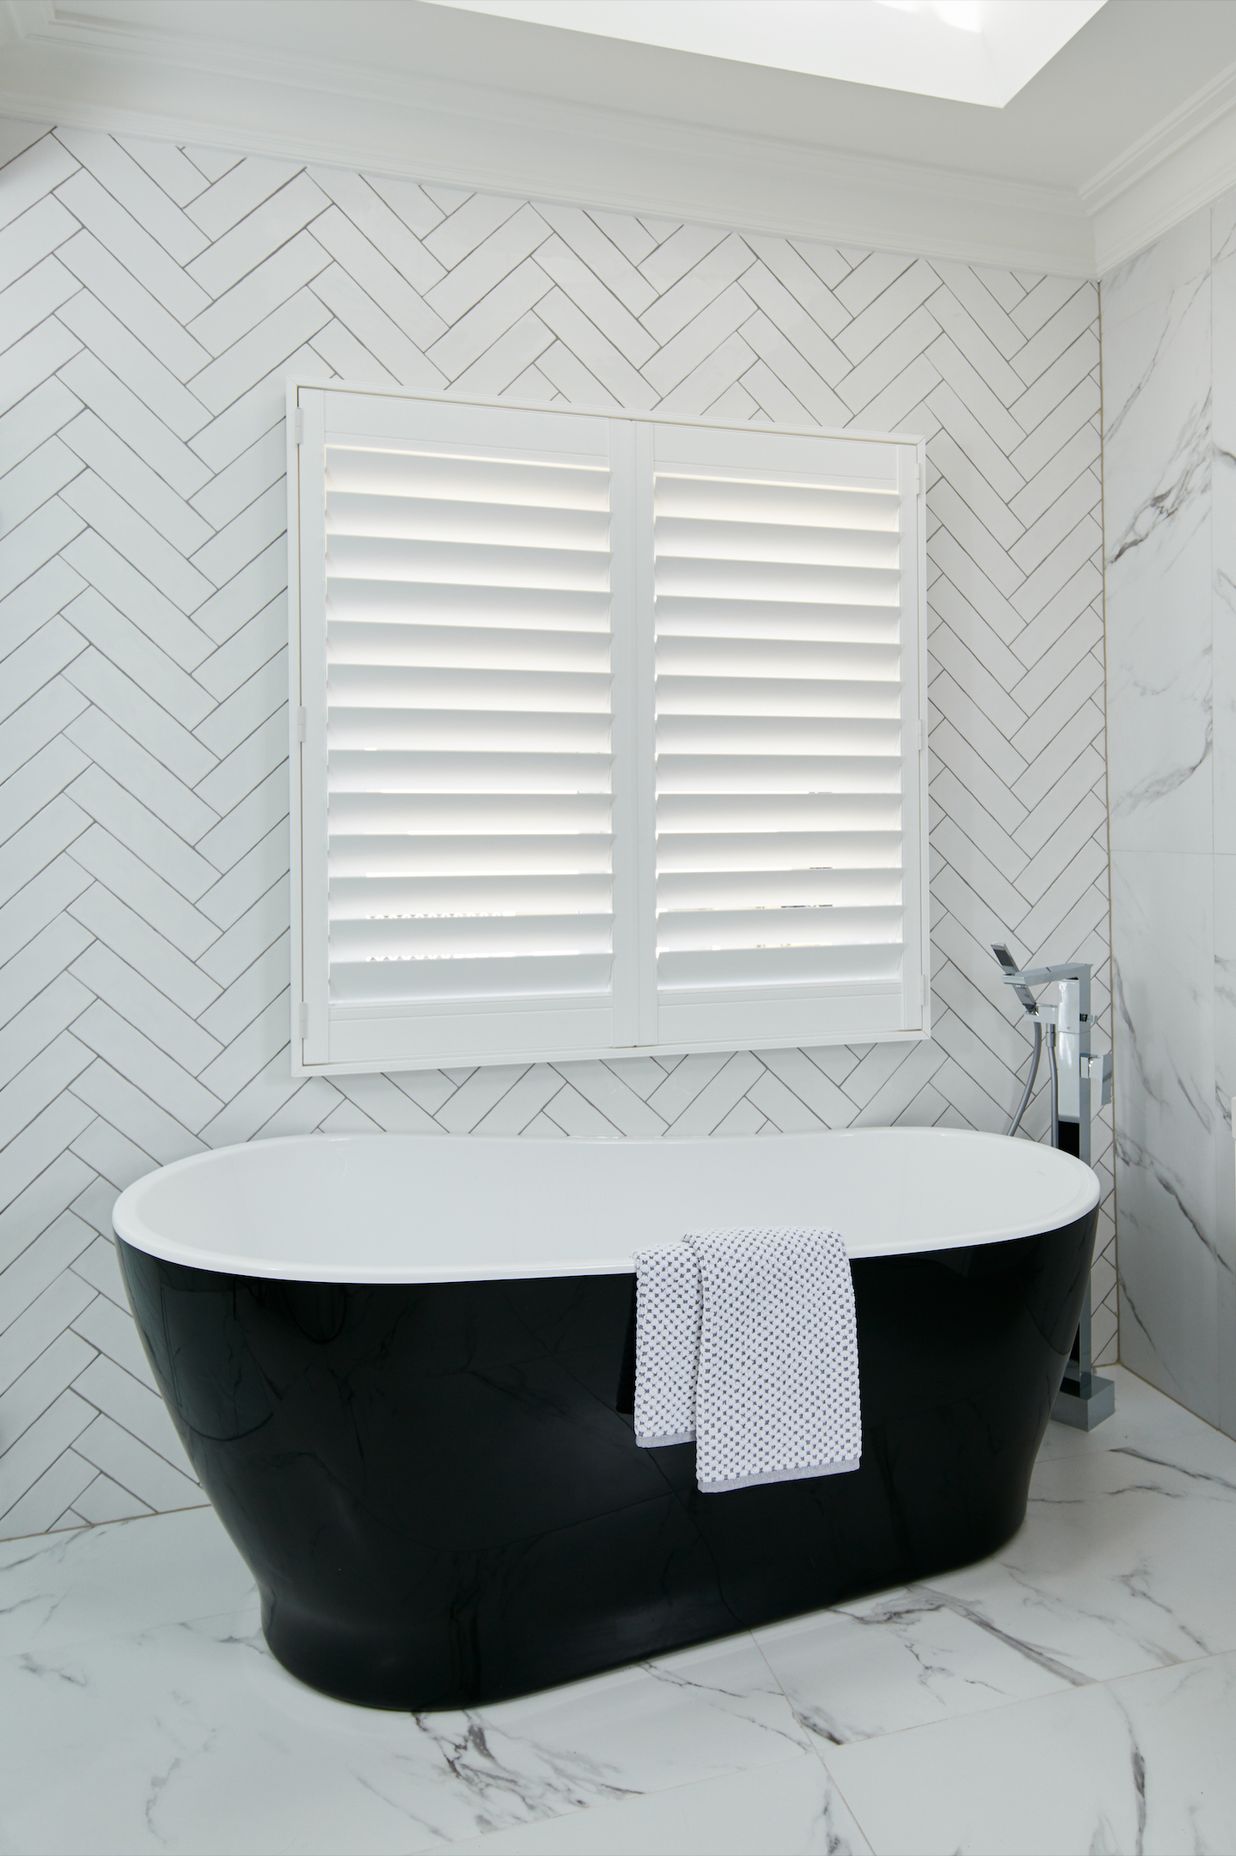 Luxaflex PolySatin shutters are made from an advanced polyresin compound, making them suitable for areas prone to high humidity and moisture.